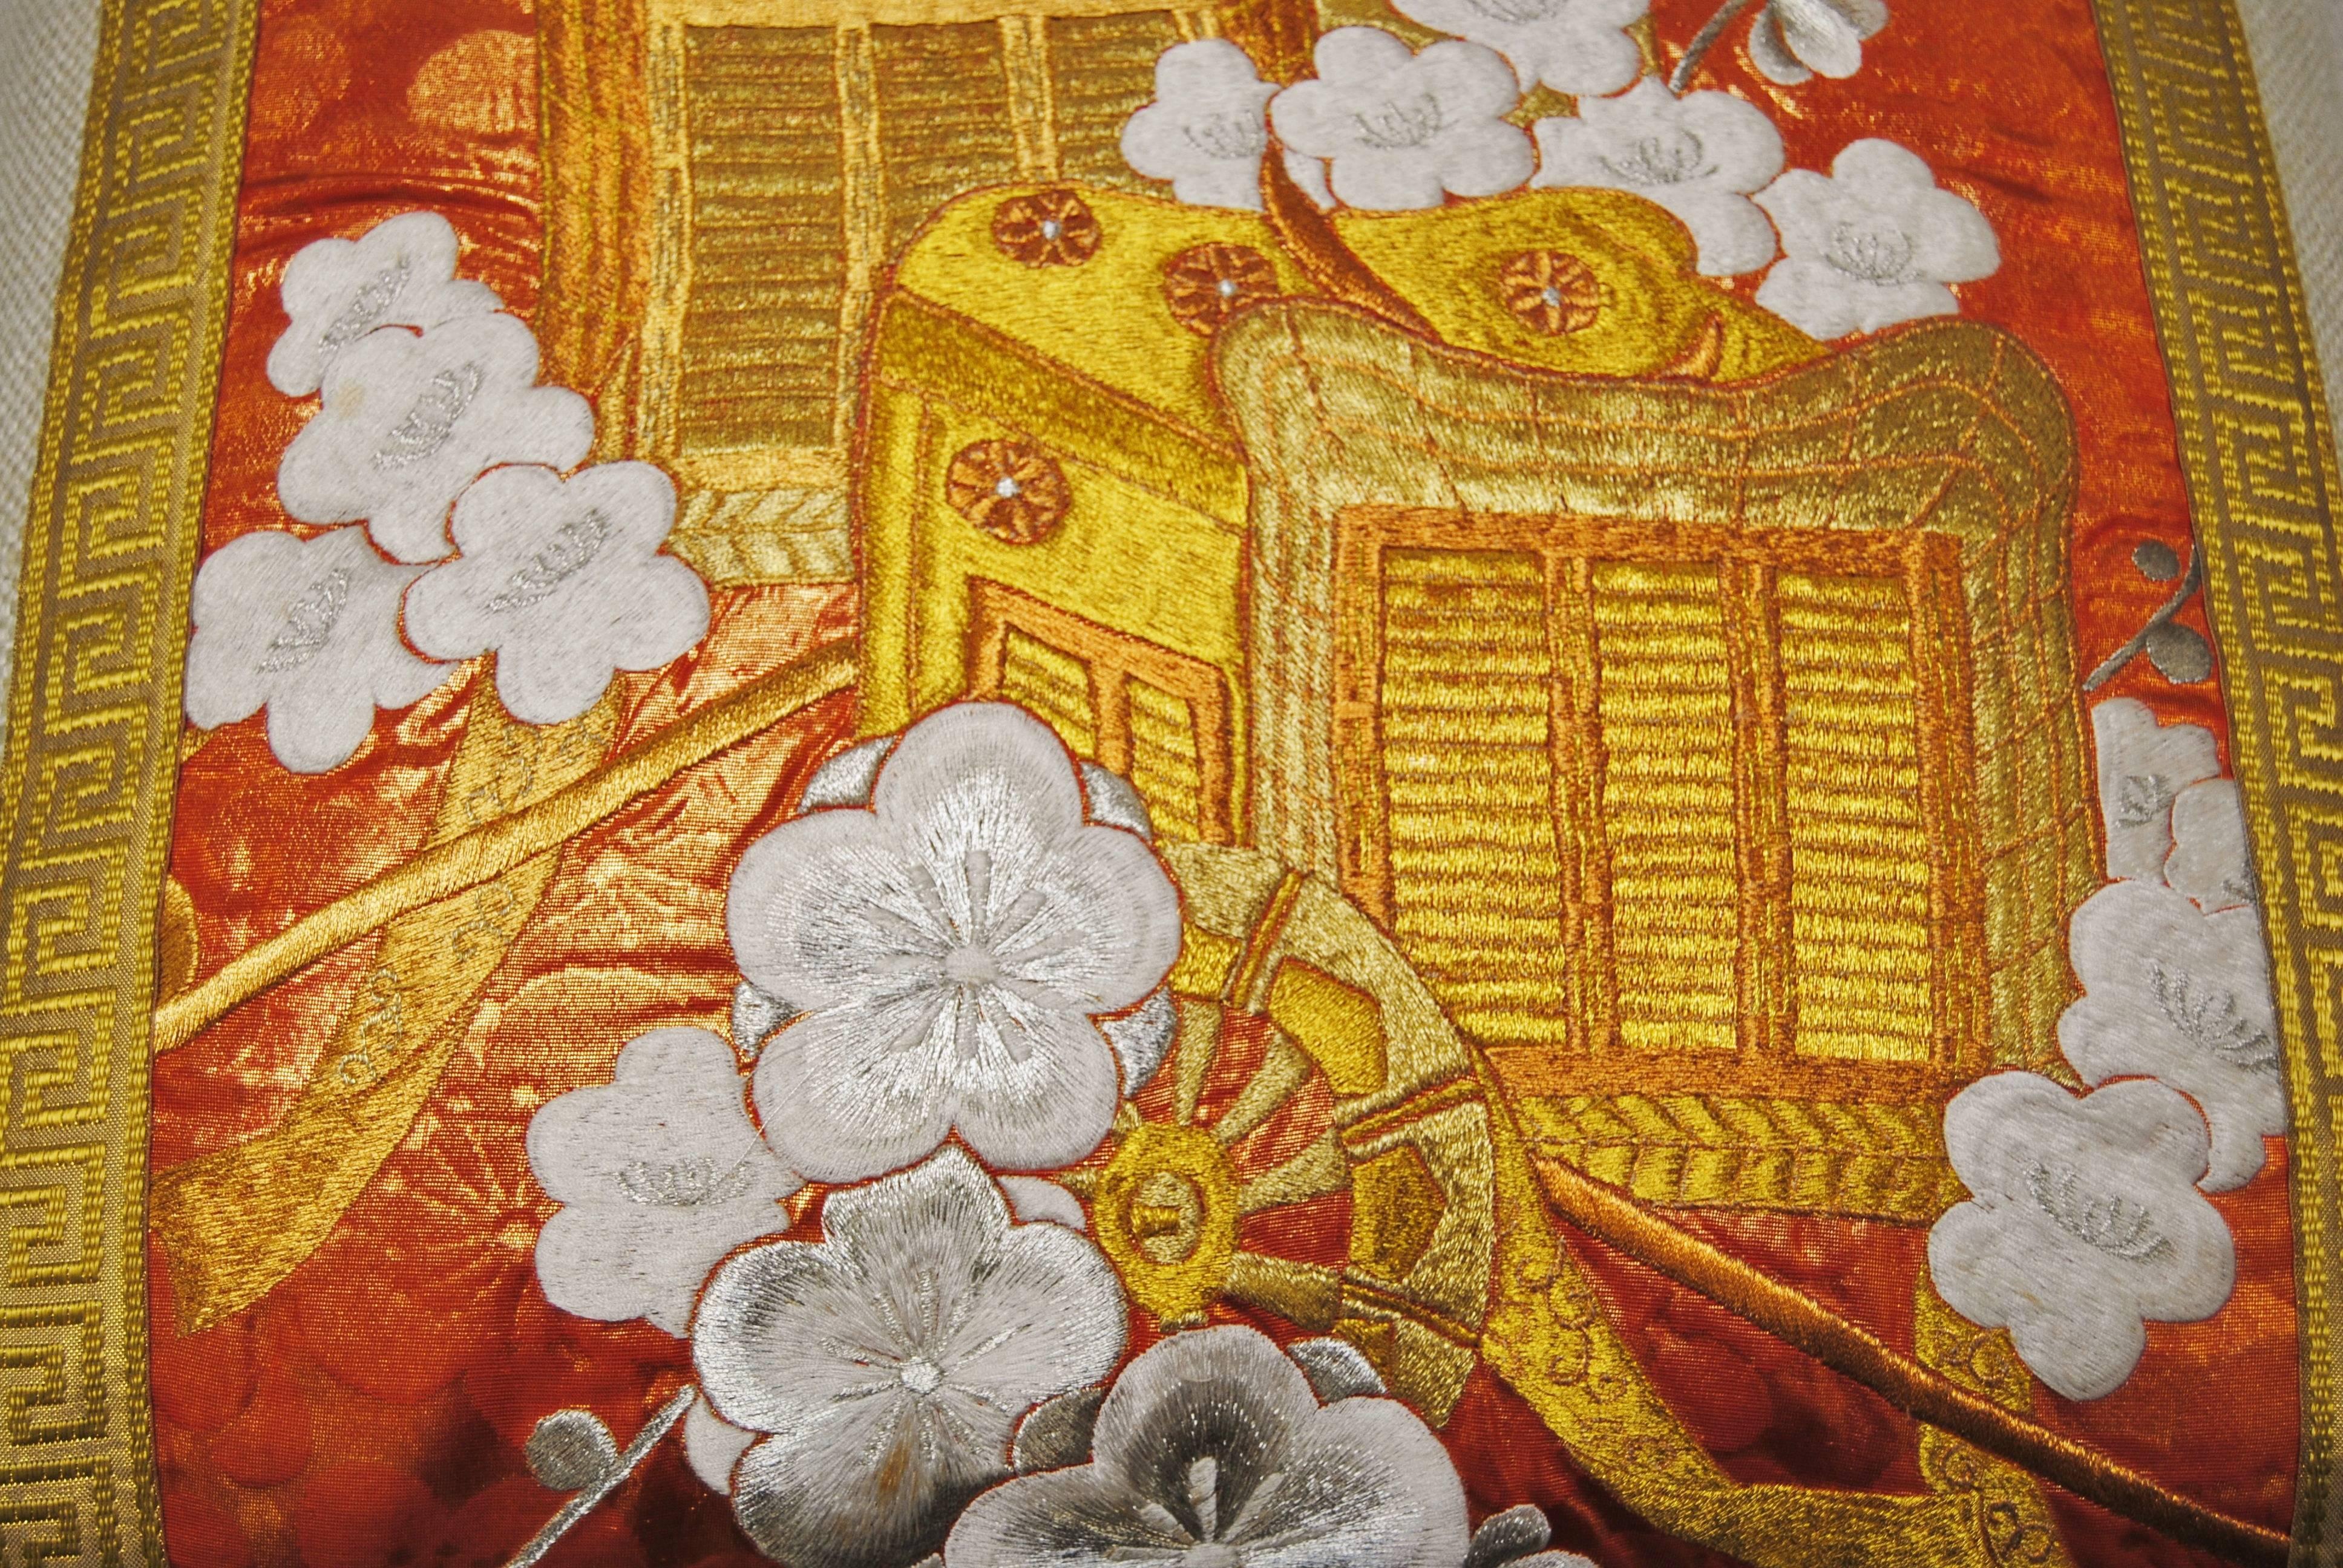 Custom Pillow from a Silk Embroidered Vintage Uchikake Wedding Kimono In Good Condition For Sale In Glen Ellyn, IL